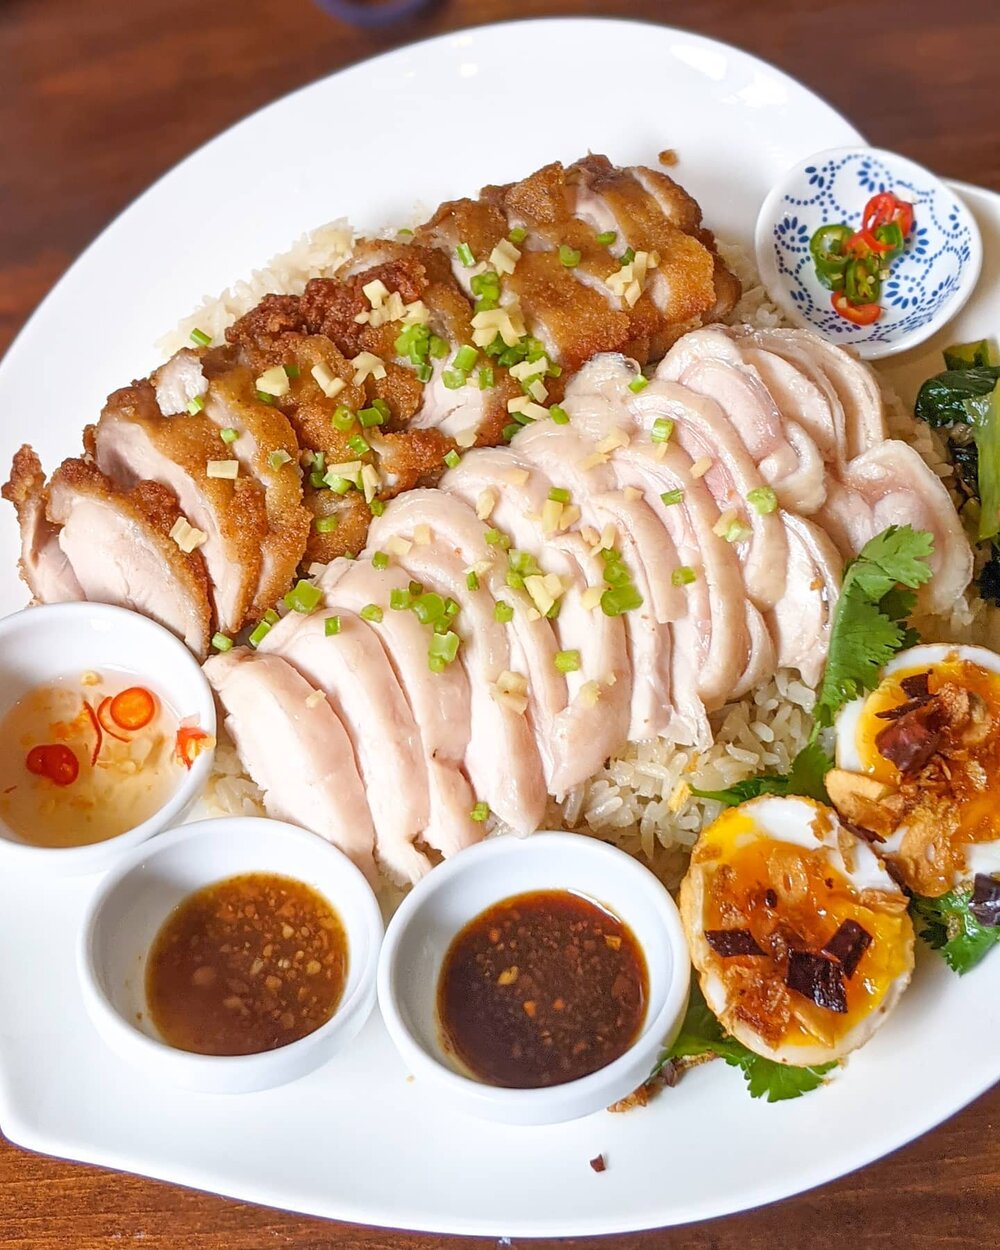 There are many trendy shops and restaurants in Daimyo, but few have withstood the test of time like Hakata Kaomangai Bankokuya - a Thai Chicken and Rice specialty shop, with only one signature dish on the menu.

Located down a narrow strip of road wh